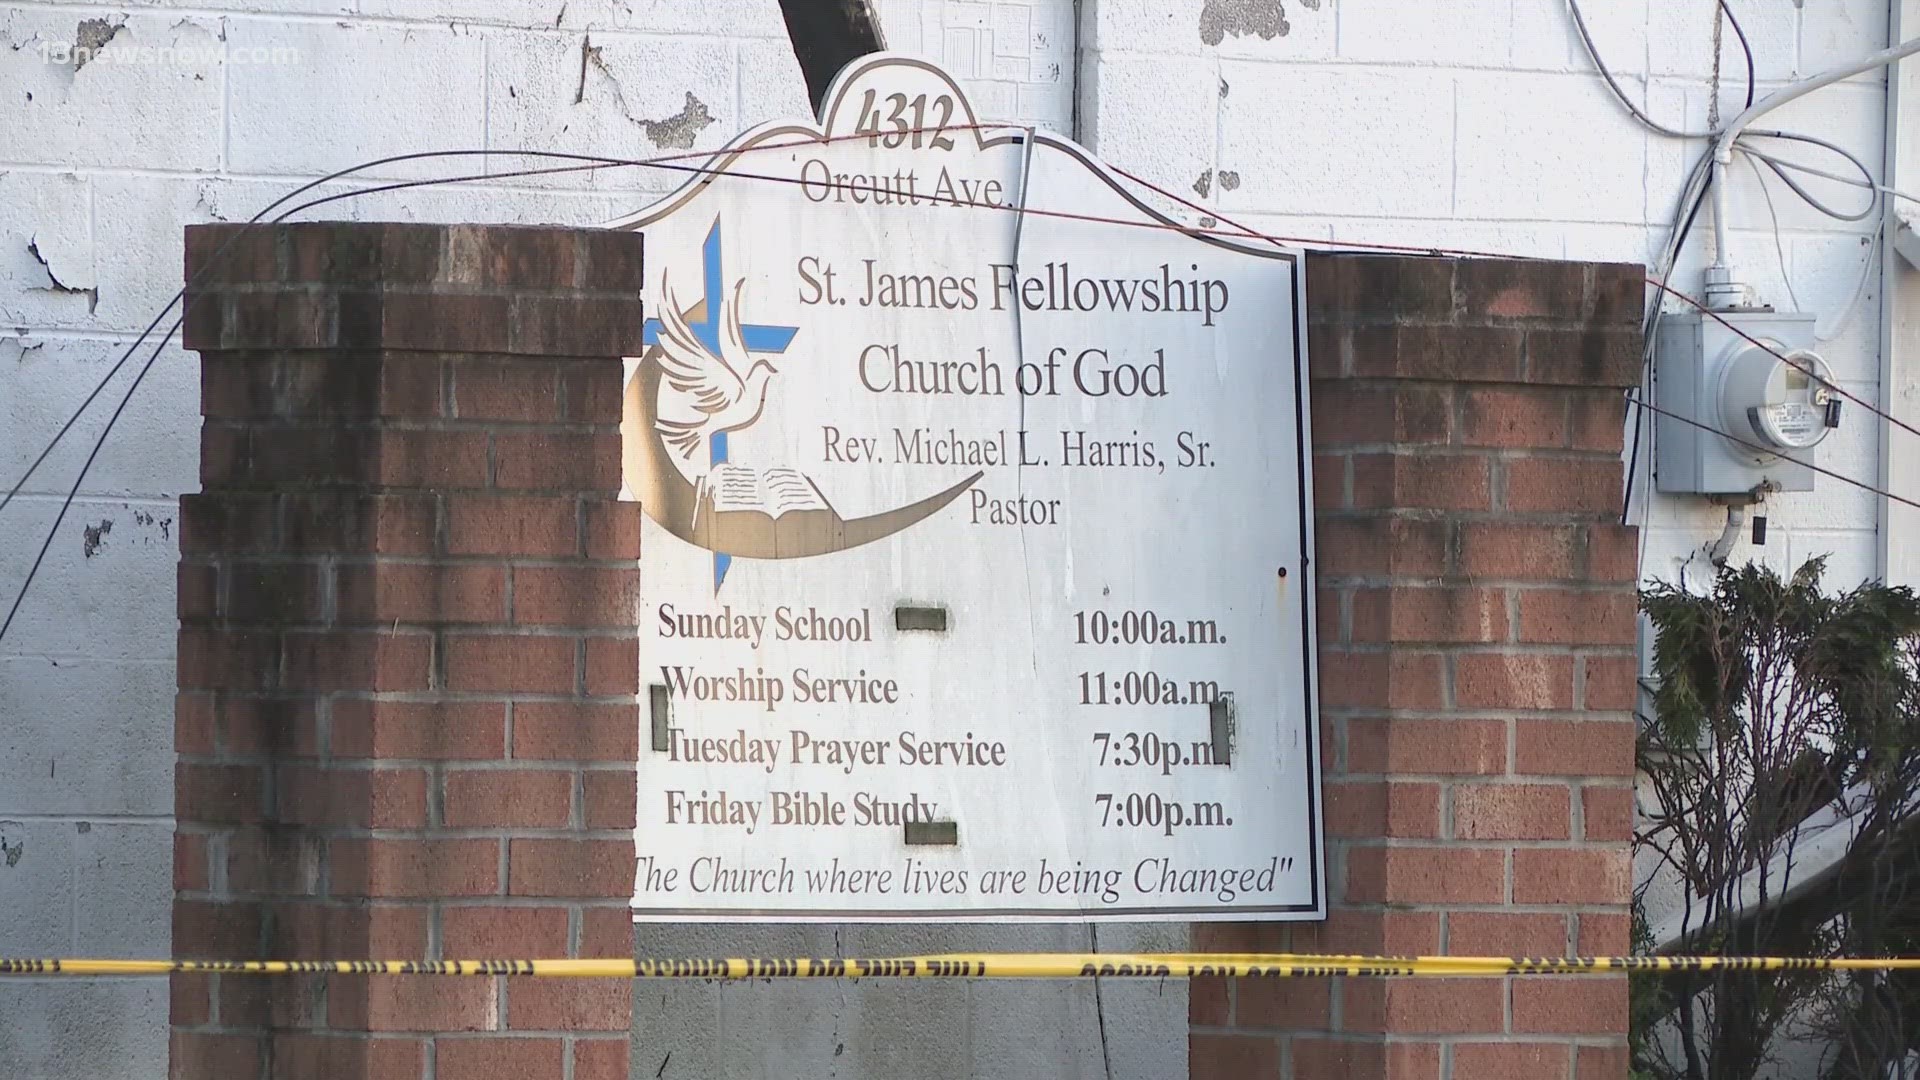 Fire officials say no one is hurt after a fire broke out at a vacant church Sunday.